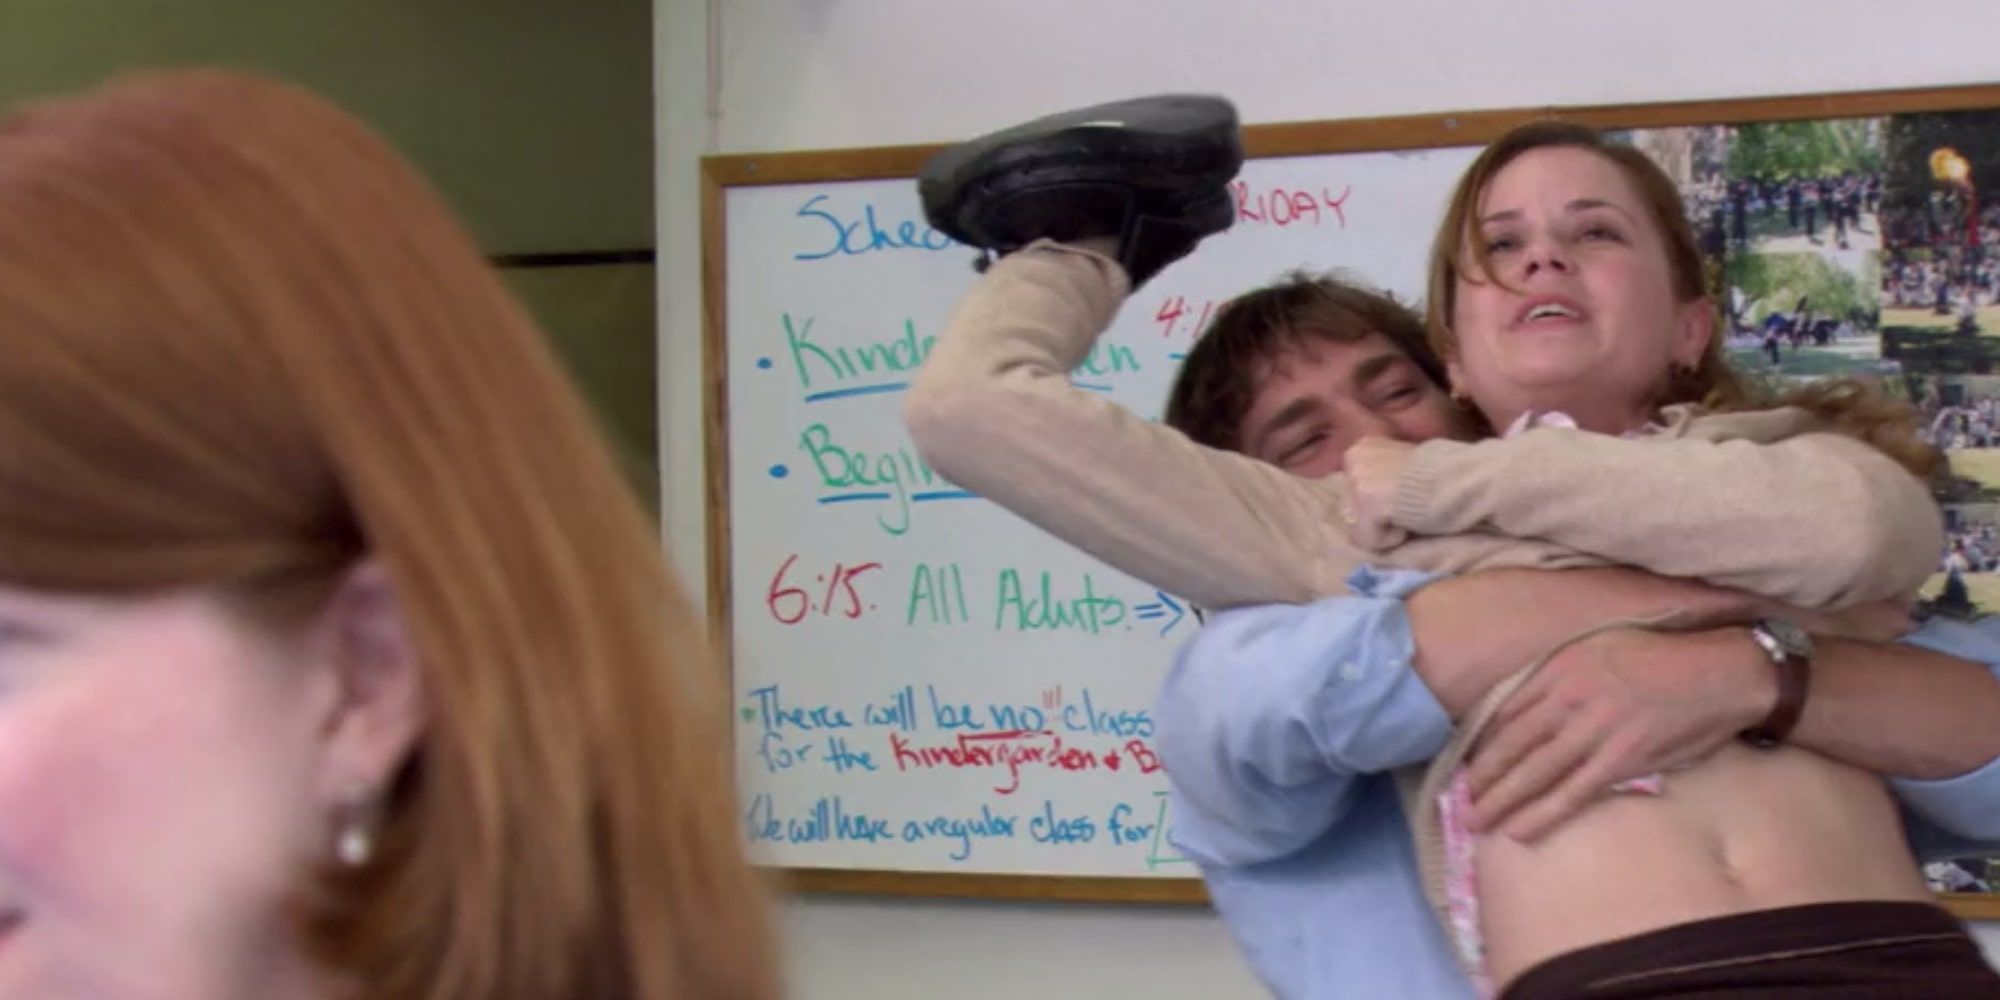 Jim lifting up Pam on The Office